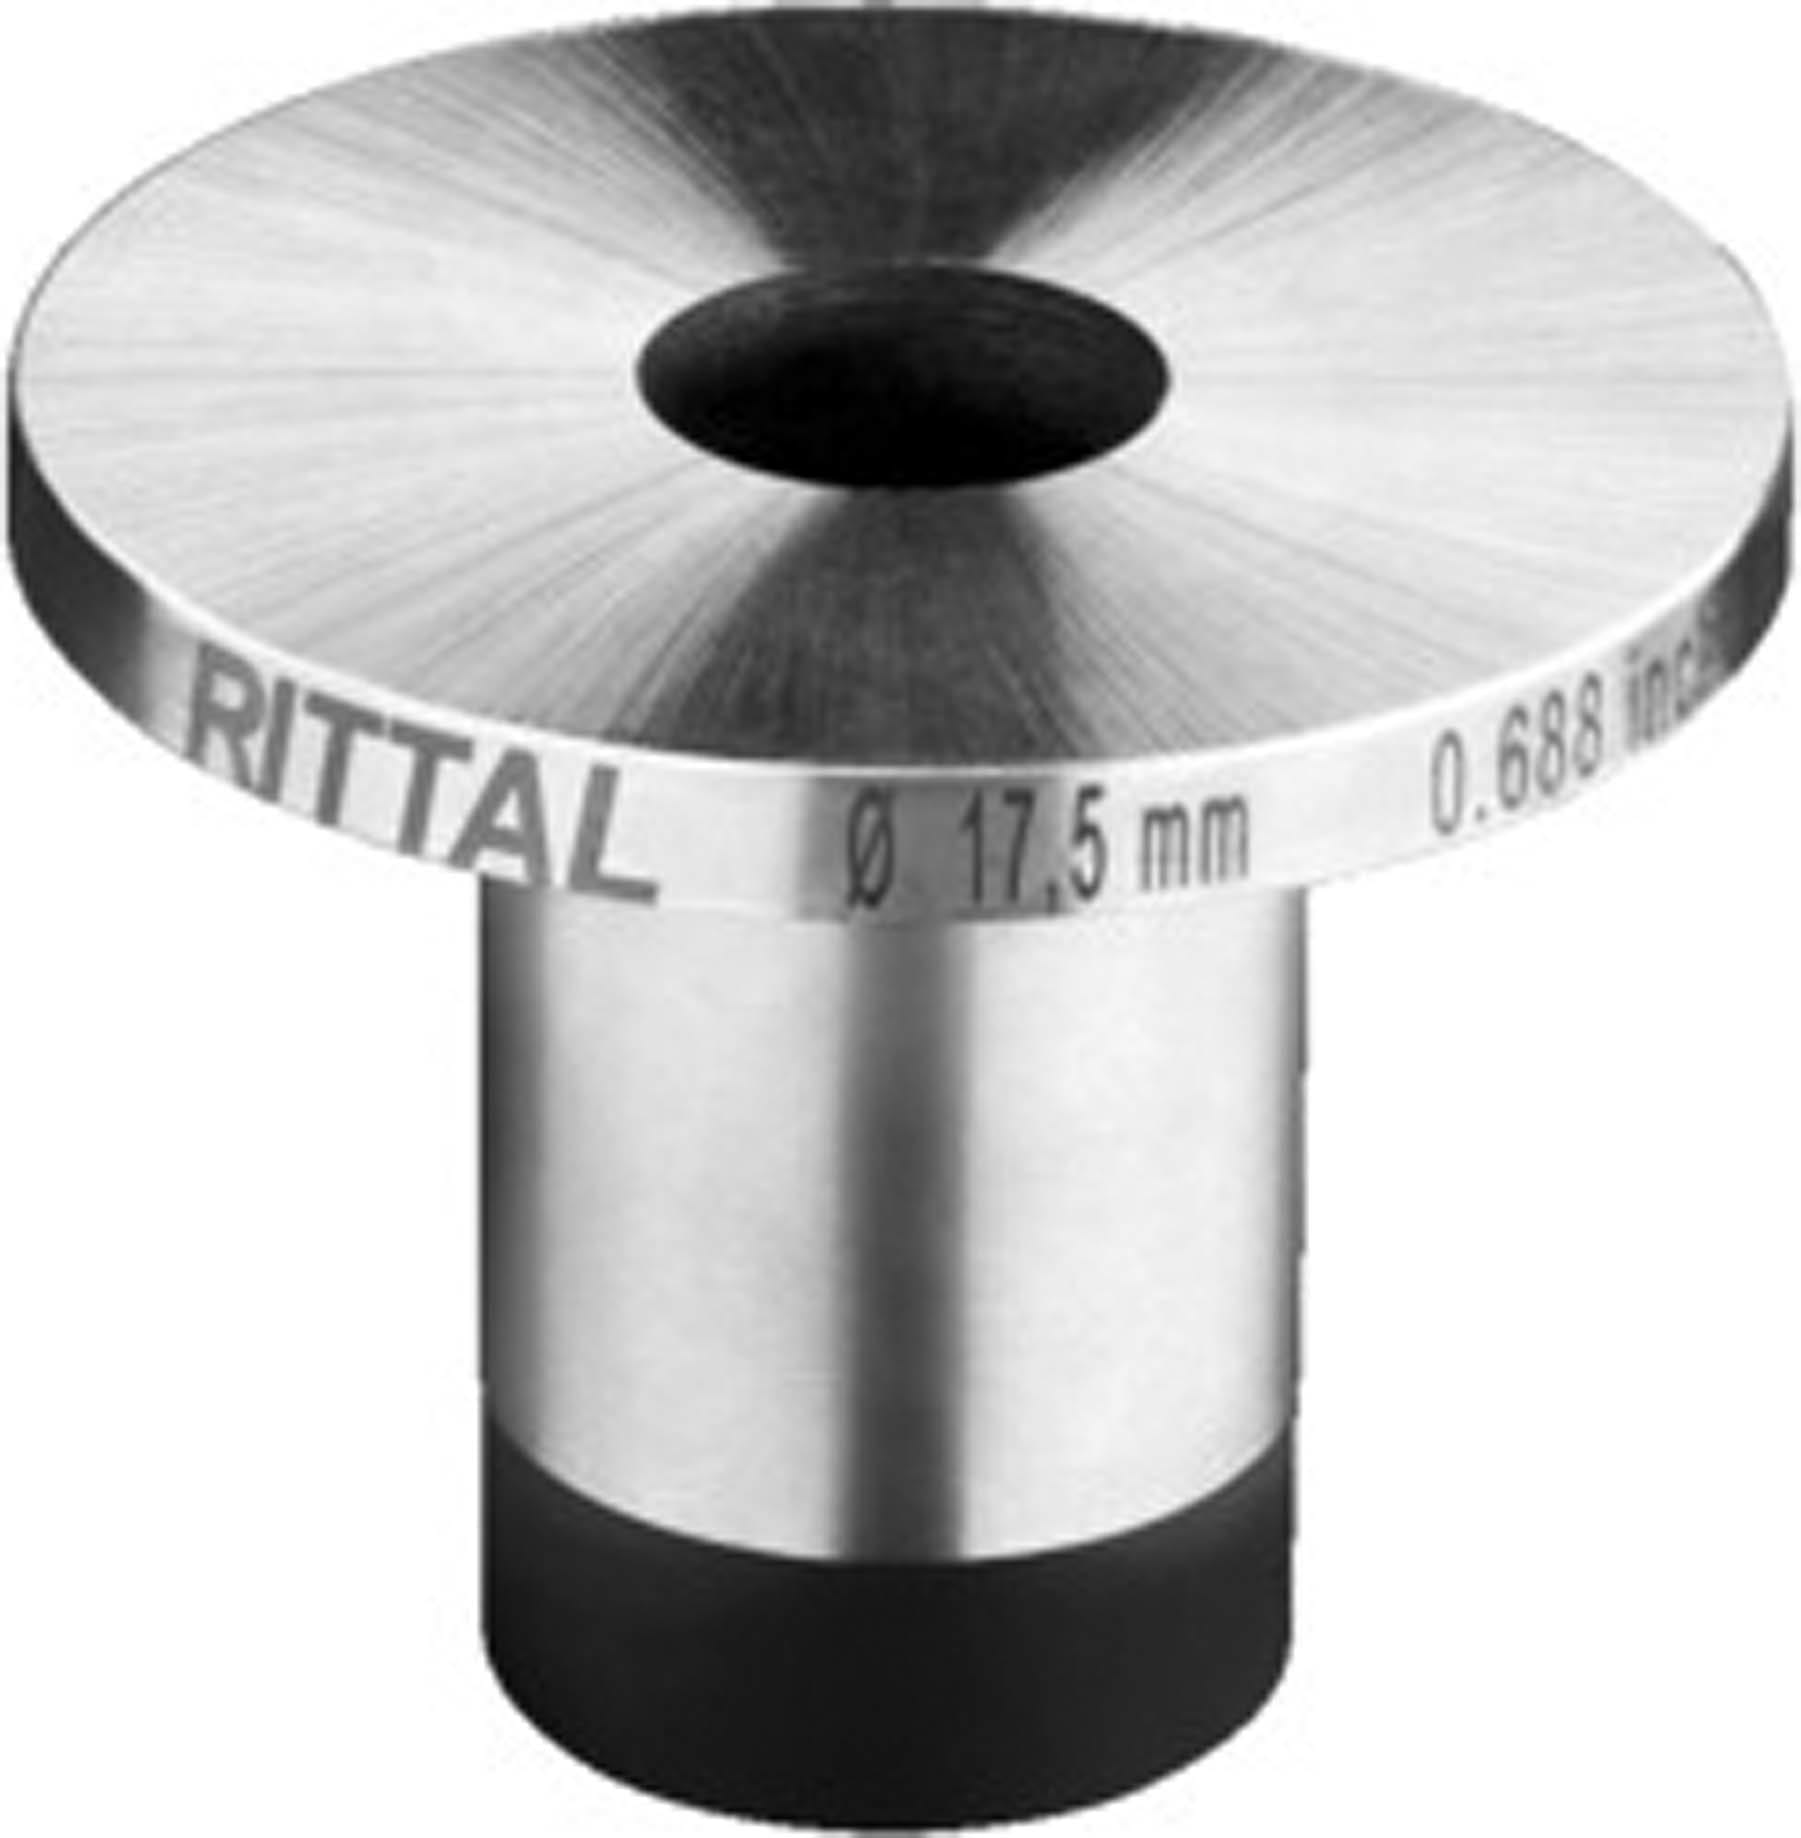 Rittal - Matrice ronde 21,5 mm gamme automation systems